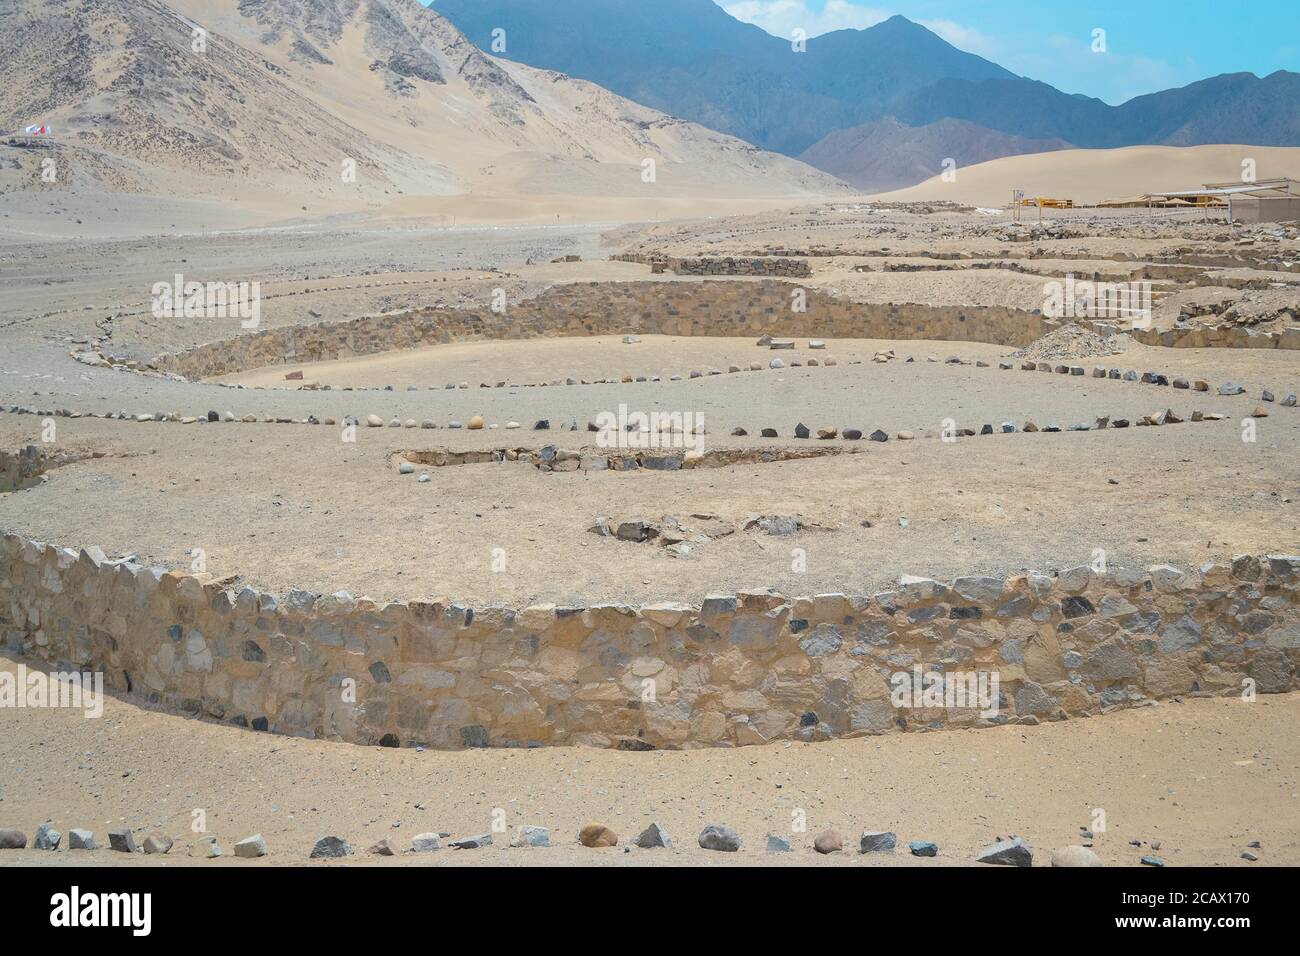 Ruins of the ancient archaeological site of Caral located in Peru during daylight Stock Photo